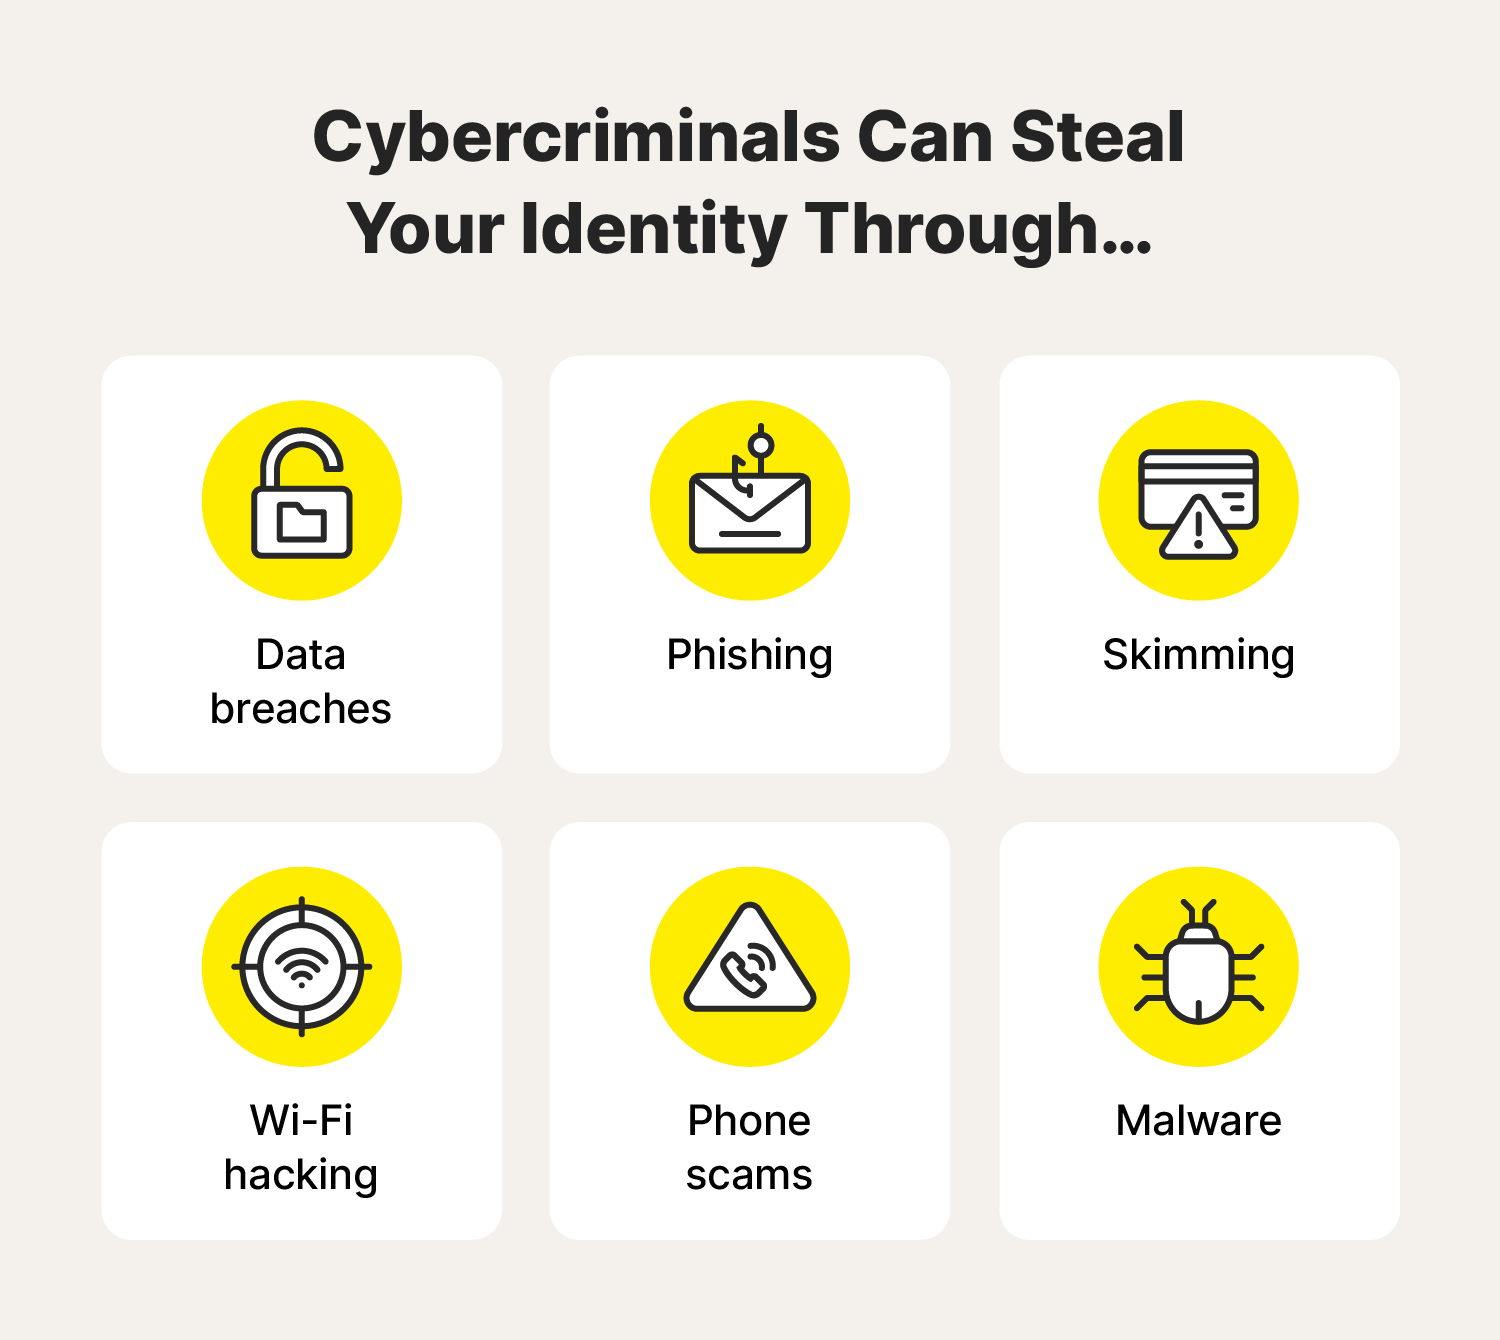 A graphic explains some ways how cybercriminals can steal your identity.